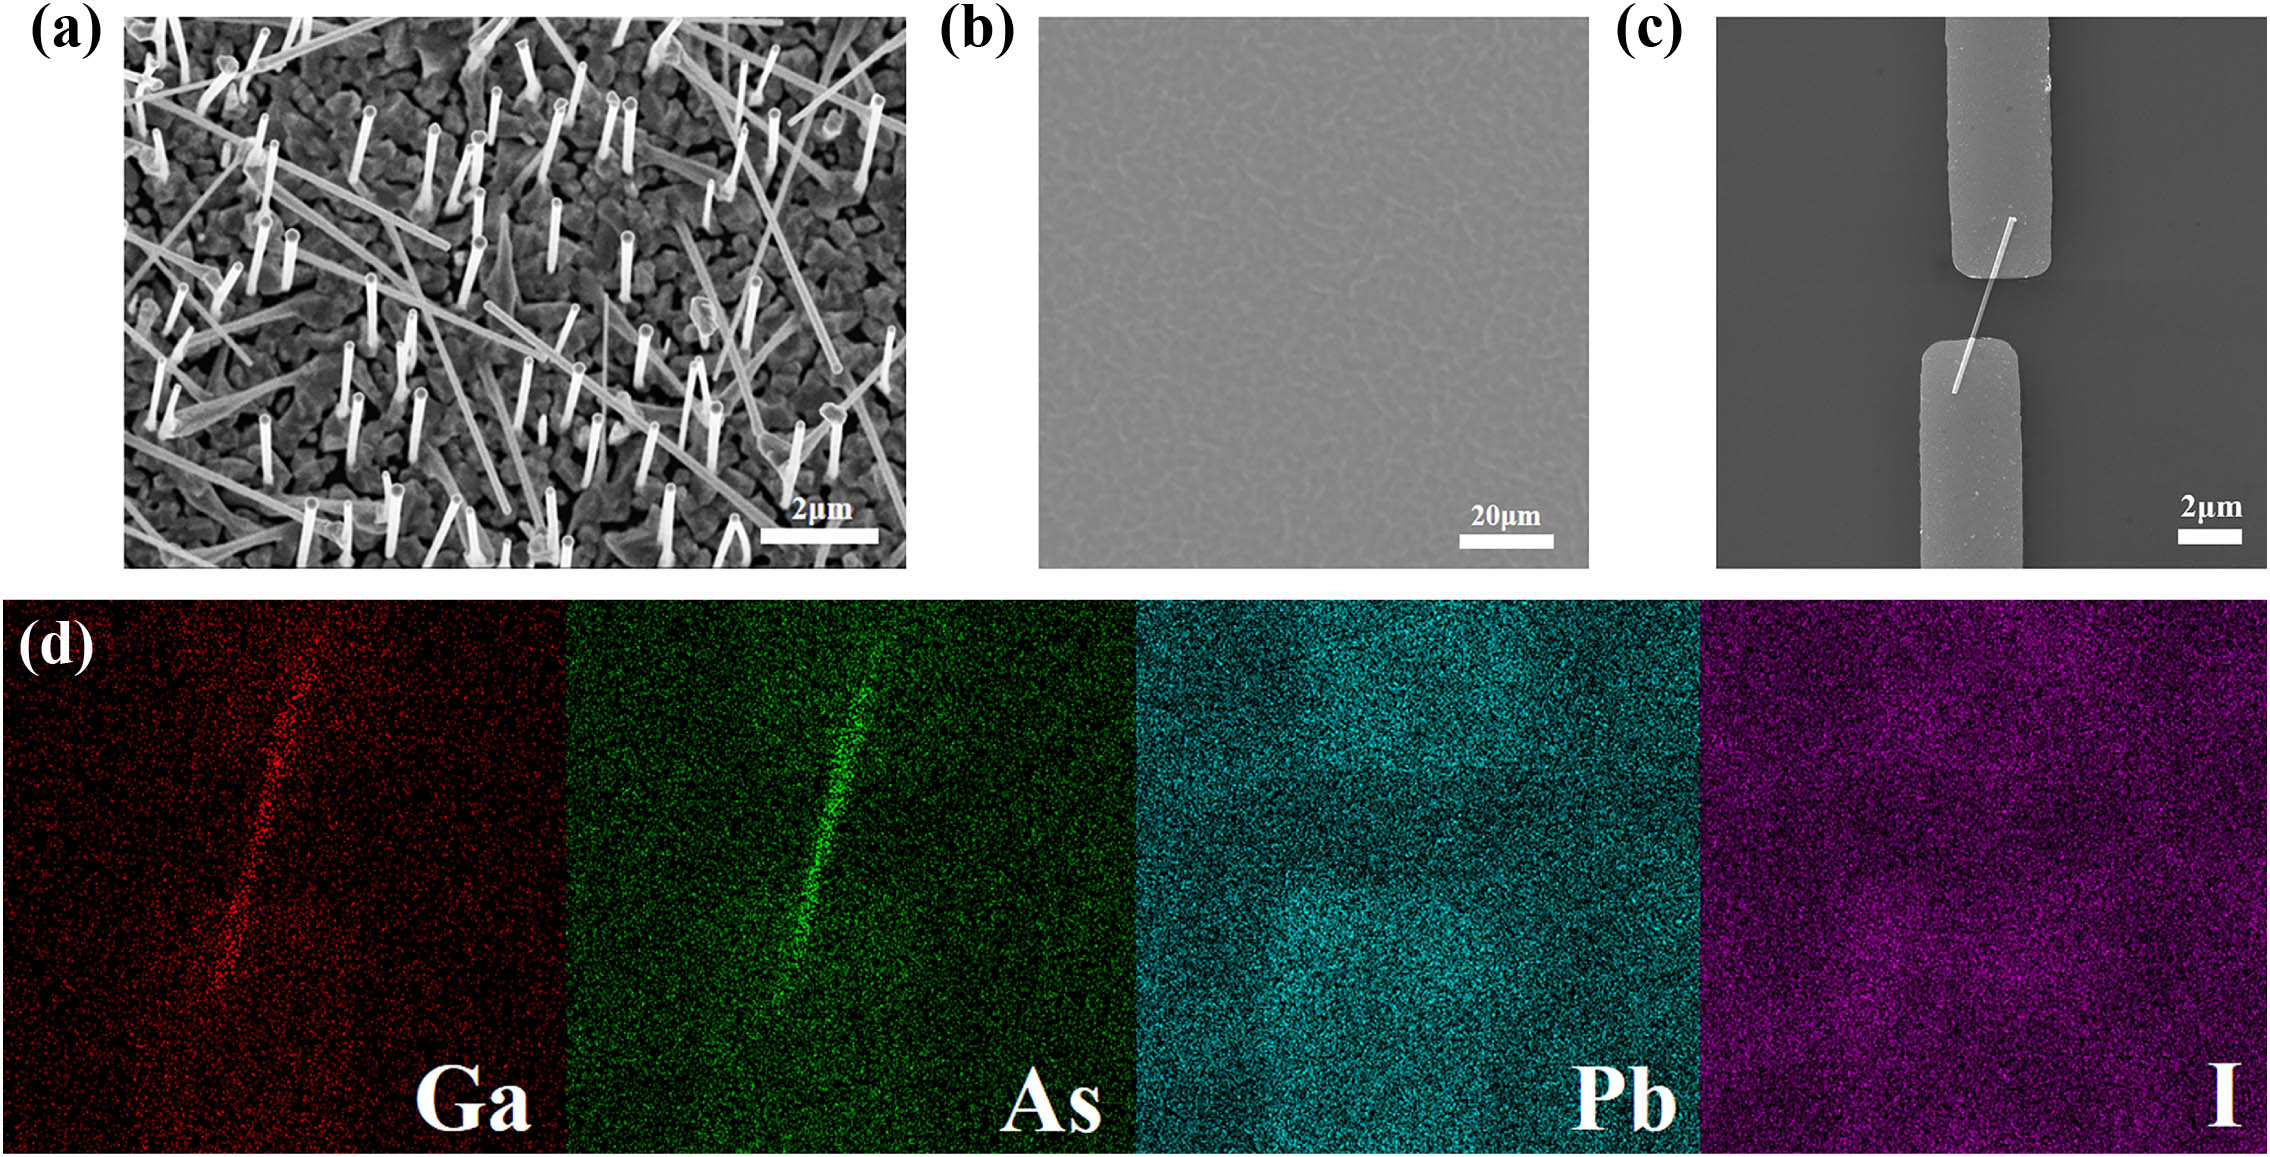 (a) SEM image of as-grown GaAs NWs, (b) the perovskite surface, (c) the photodetector, and (d) the EDS elemental mapping images of the perovskite/GaAs hybrid structure photodetector.